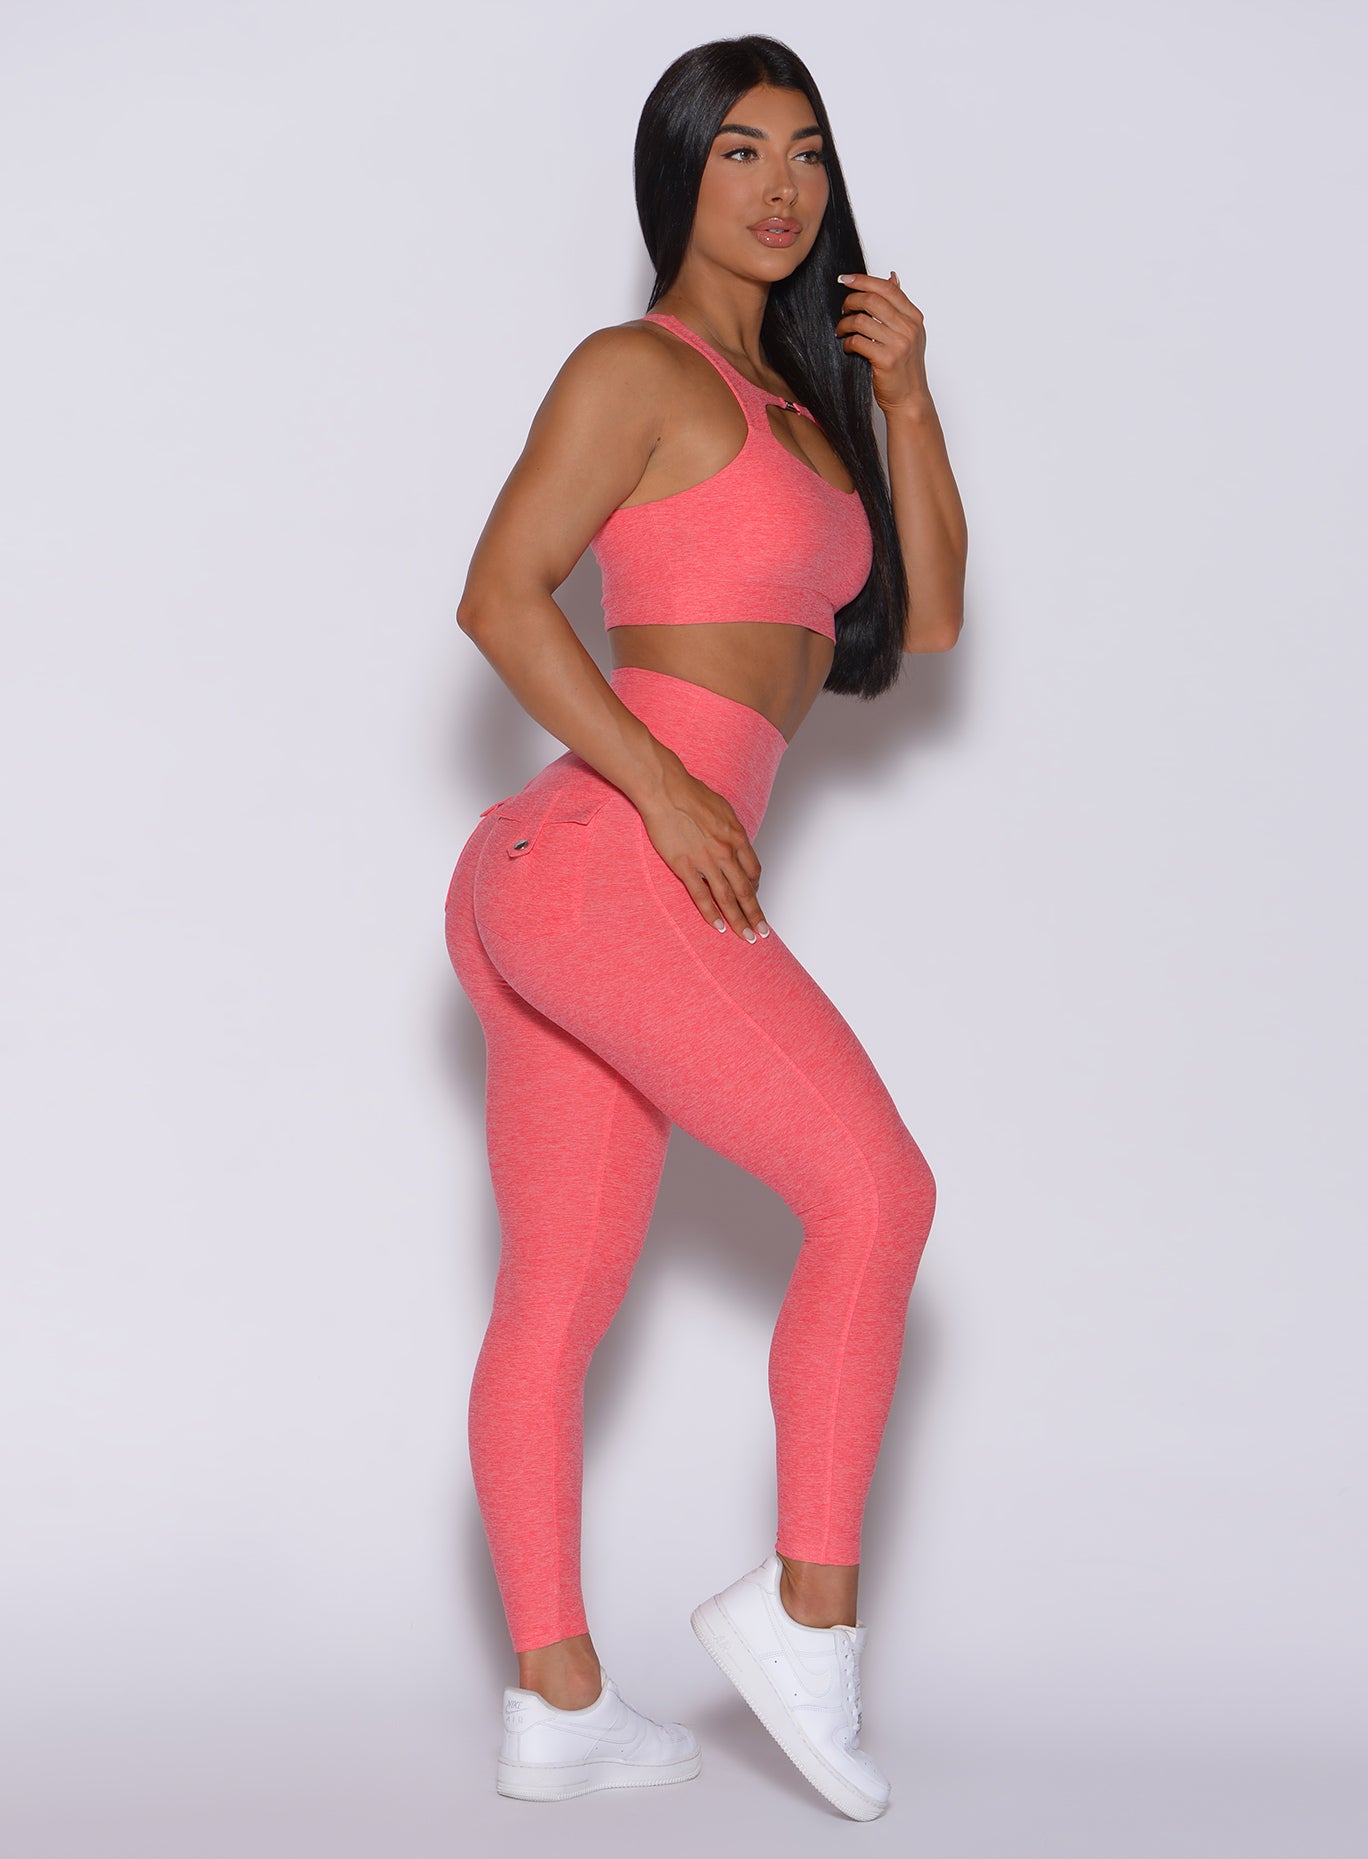 right side profile view of a model wearing our Pocket Pop Leggings in papaya color and a matching bra